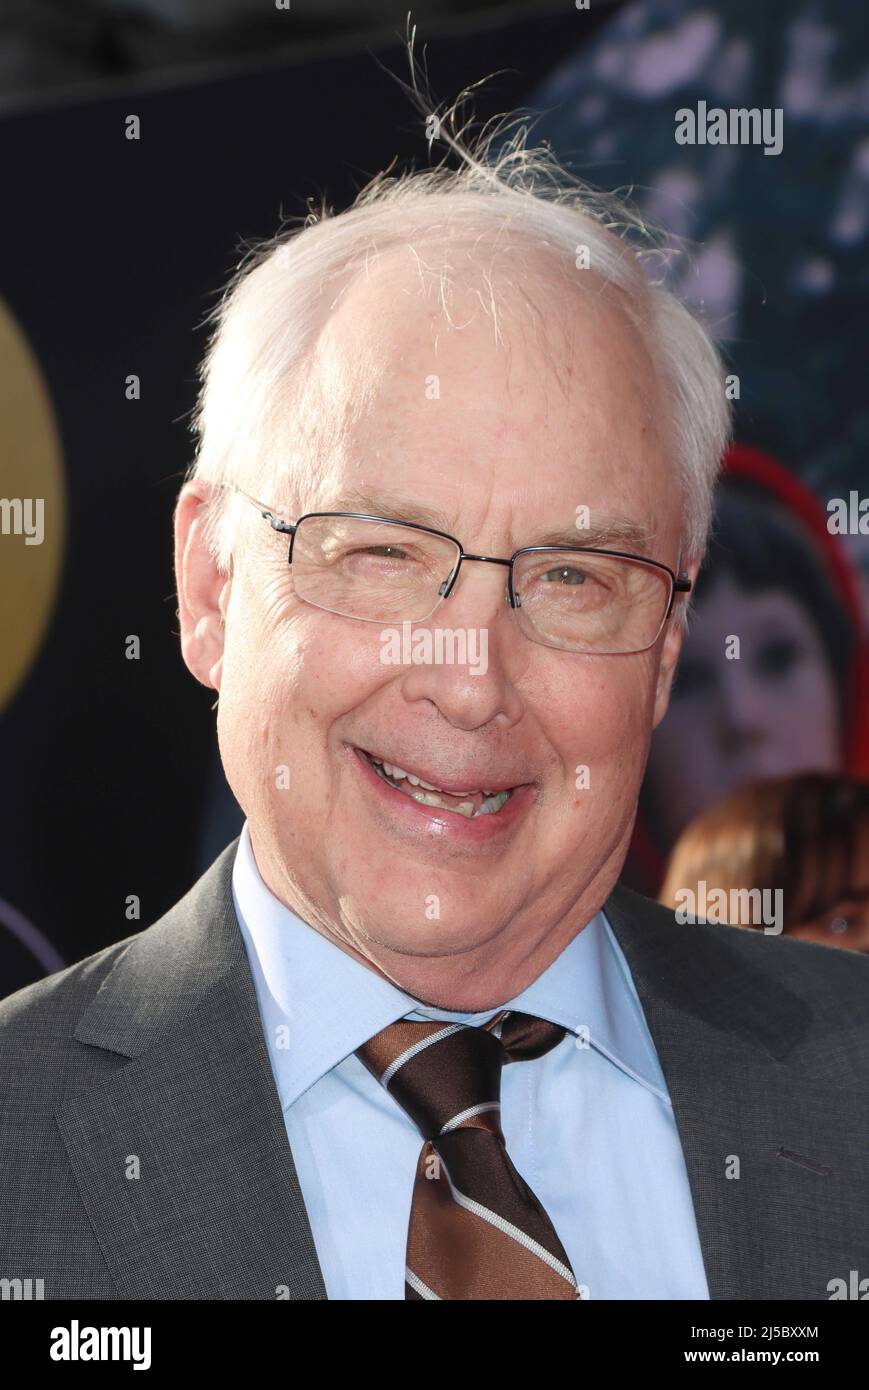 Hollywood, USA. 21st Apr, 2022. Ben Burtt 2022/04/21 The 40th Anniversary Screening of “E.T. the Extra-Terrestrial” held at TCL Chinese Theatre in Hollywood, CA Photo by Kazuki Hirata/Hollywood News Wire Inc. Credit: Newscom/Alamy Live News Stock Photo